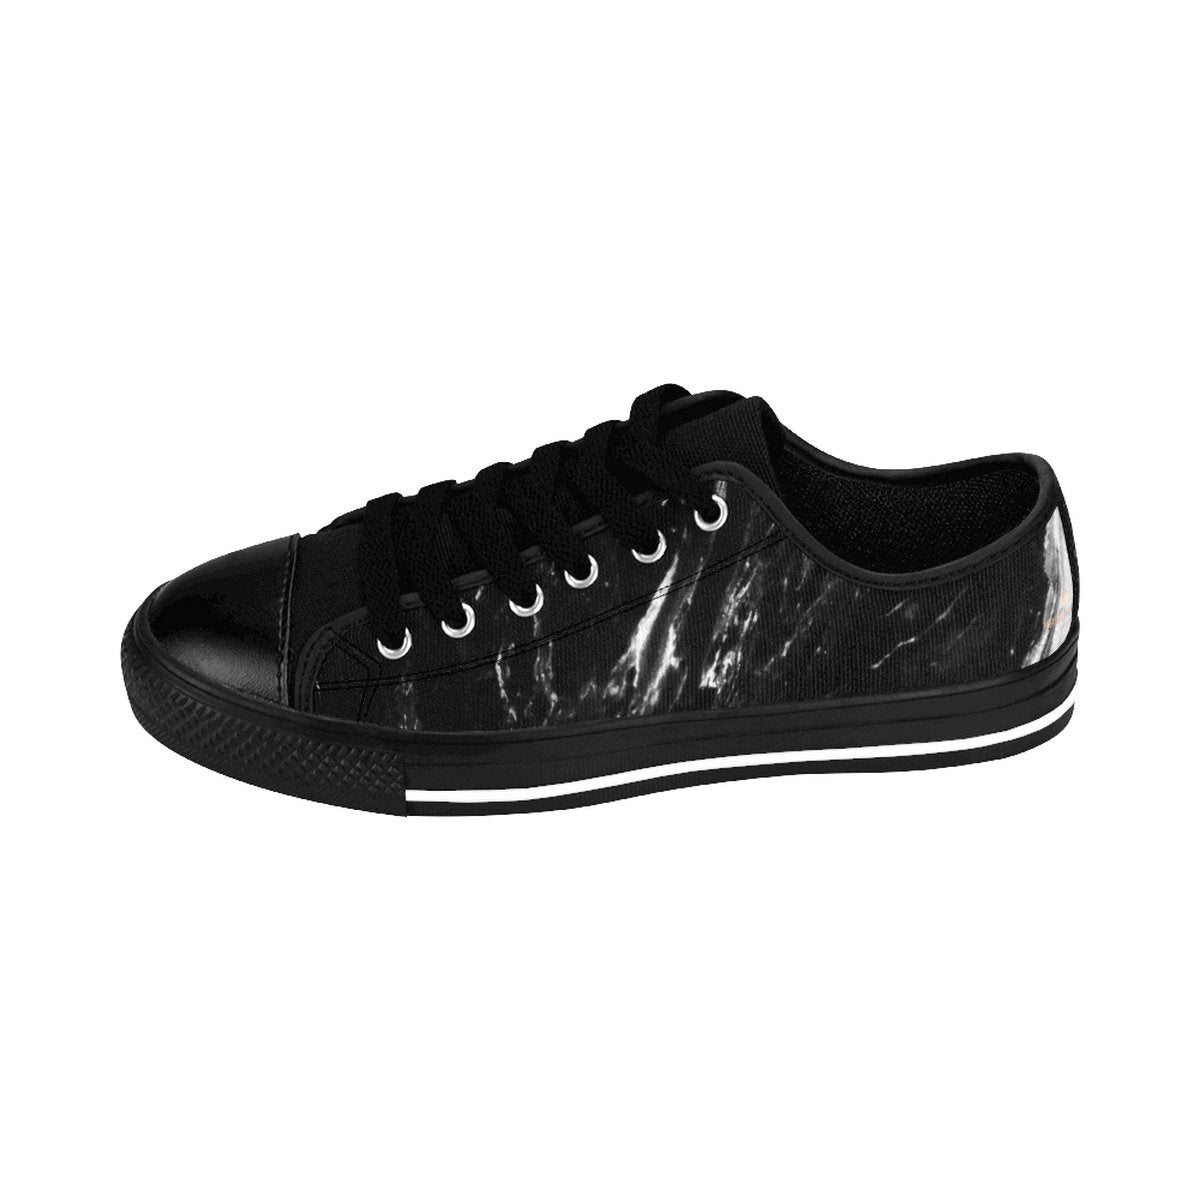 Black Marble Print Men's Low Tops, Modern Low Top Fashion Sneakers Running Shoes-Men's Low Top Sneakers-Black-US 9-Heidi Kimura Art LLC Black Marble Print Men's Sneakers, Black Marble Print Men's Low Tops, Black Marble Modern Print Men's Low Top Nylon Canvas Sneakers Fashion Running Tennis Shoes (US Size: 7-14)